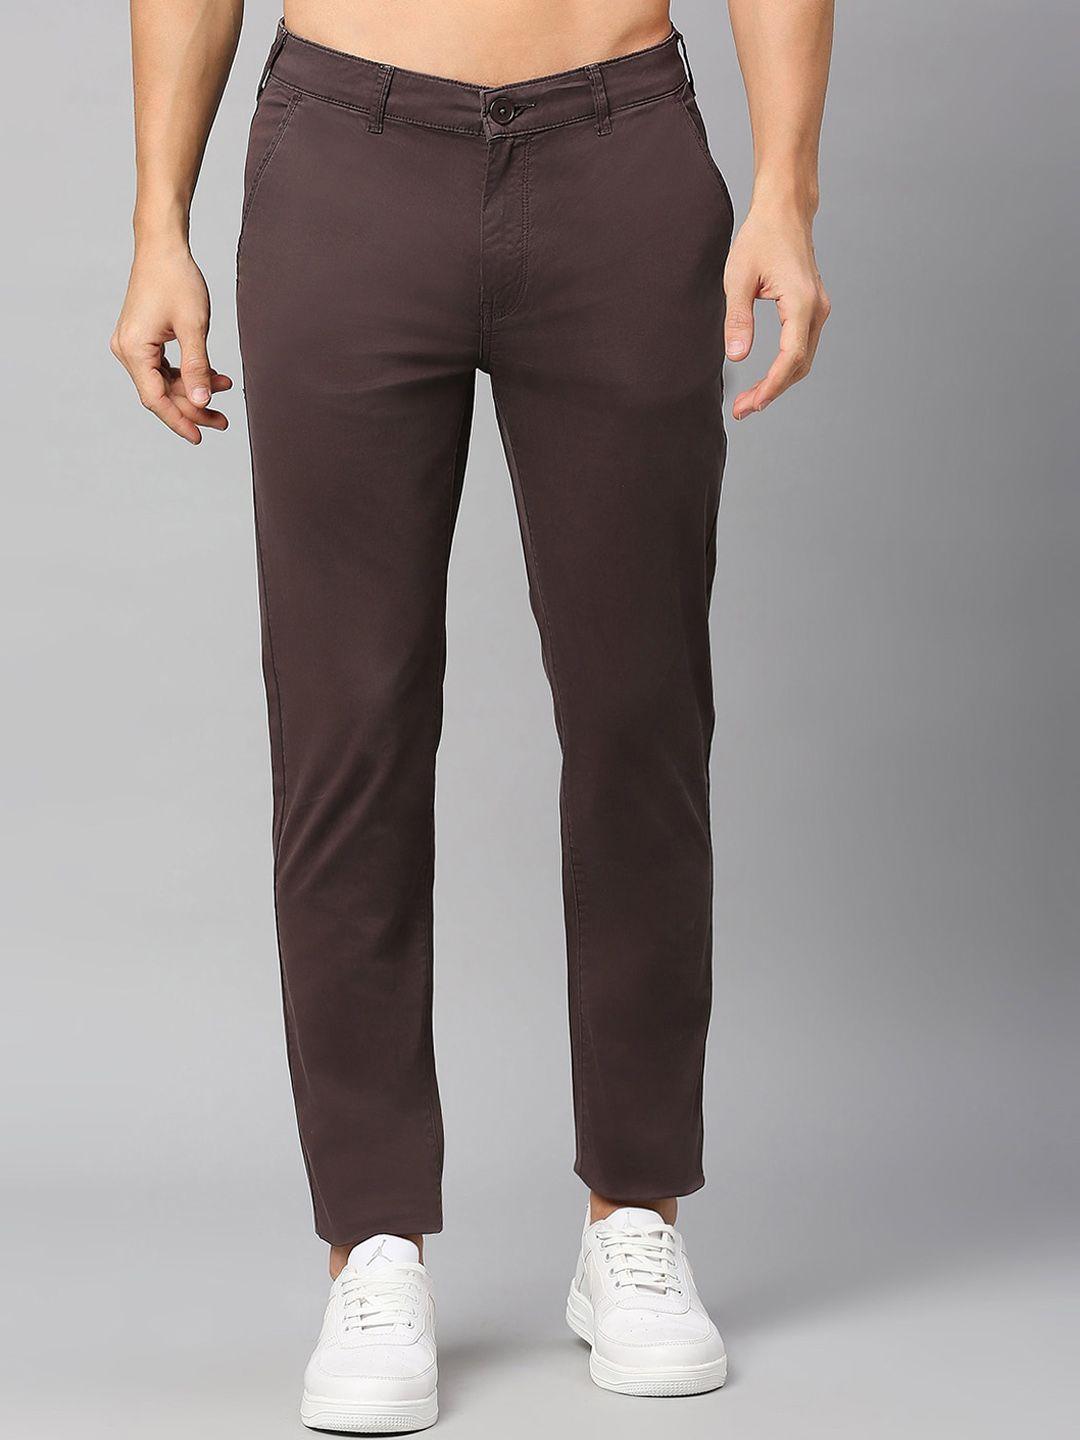 here&now men slim fit trousers